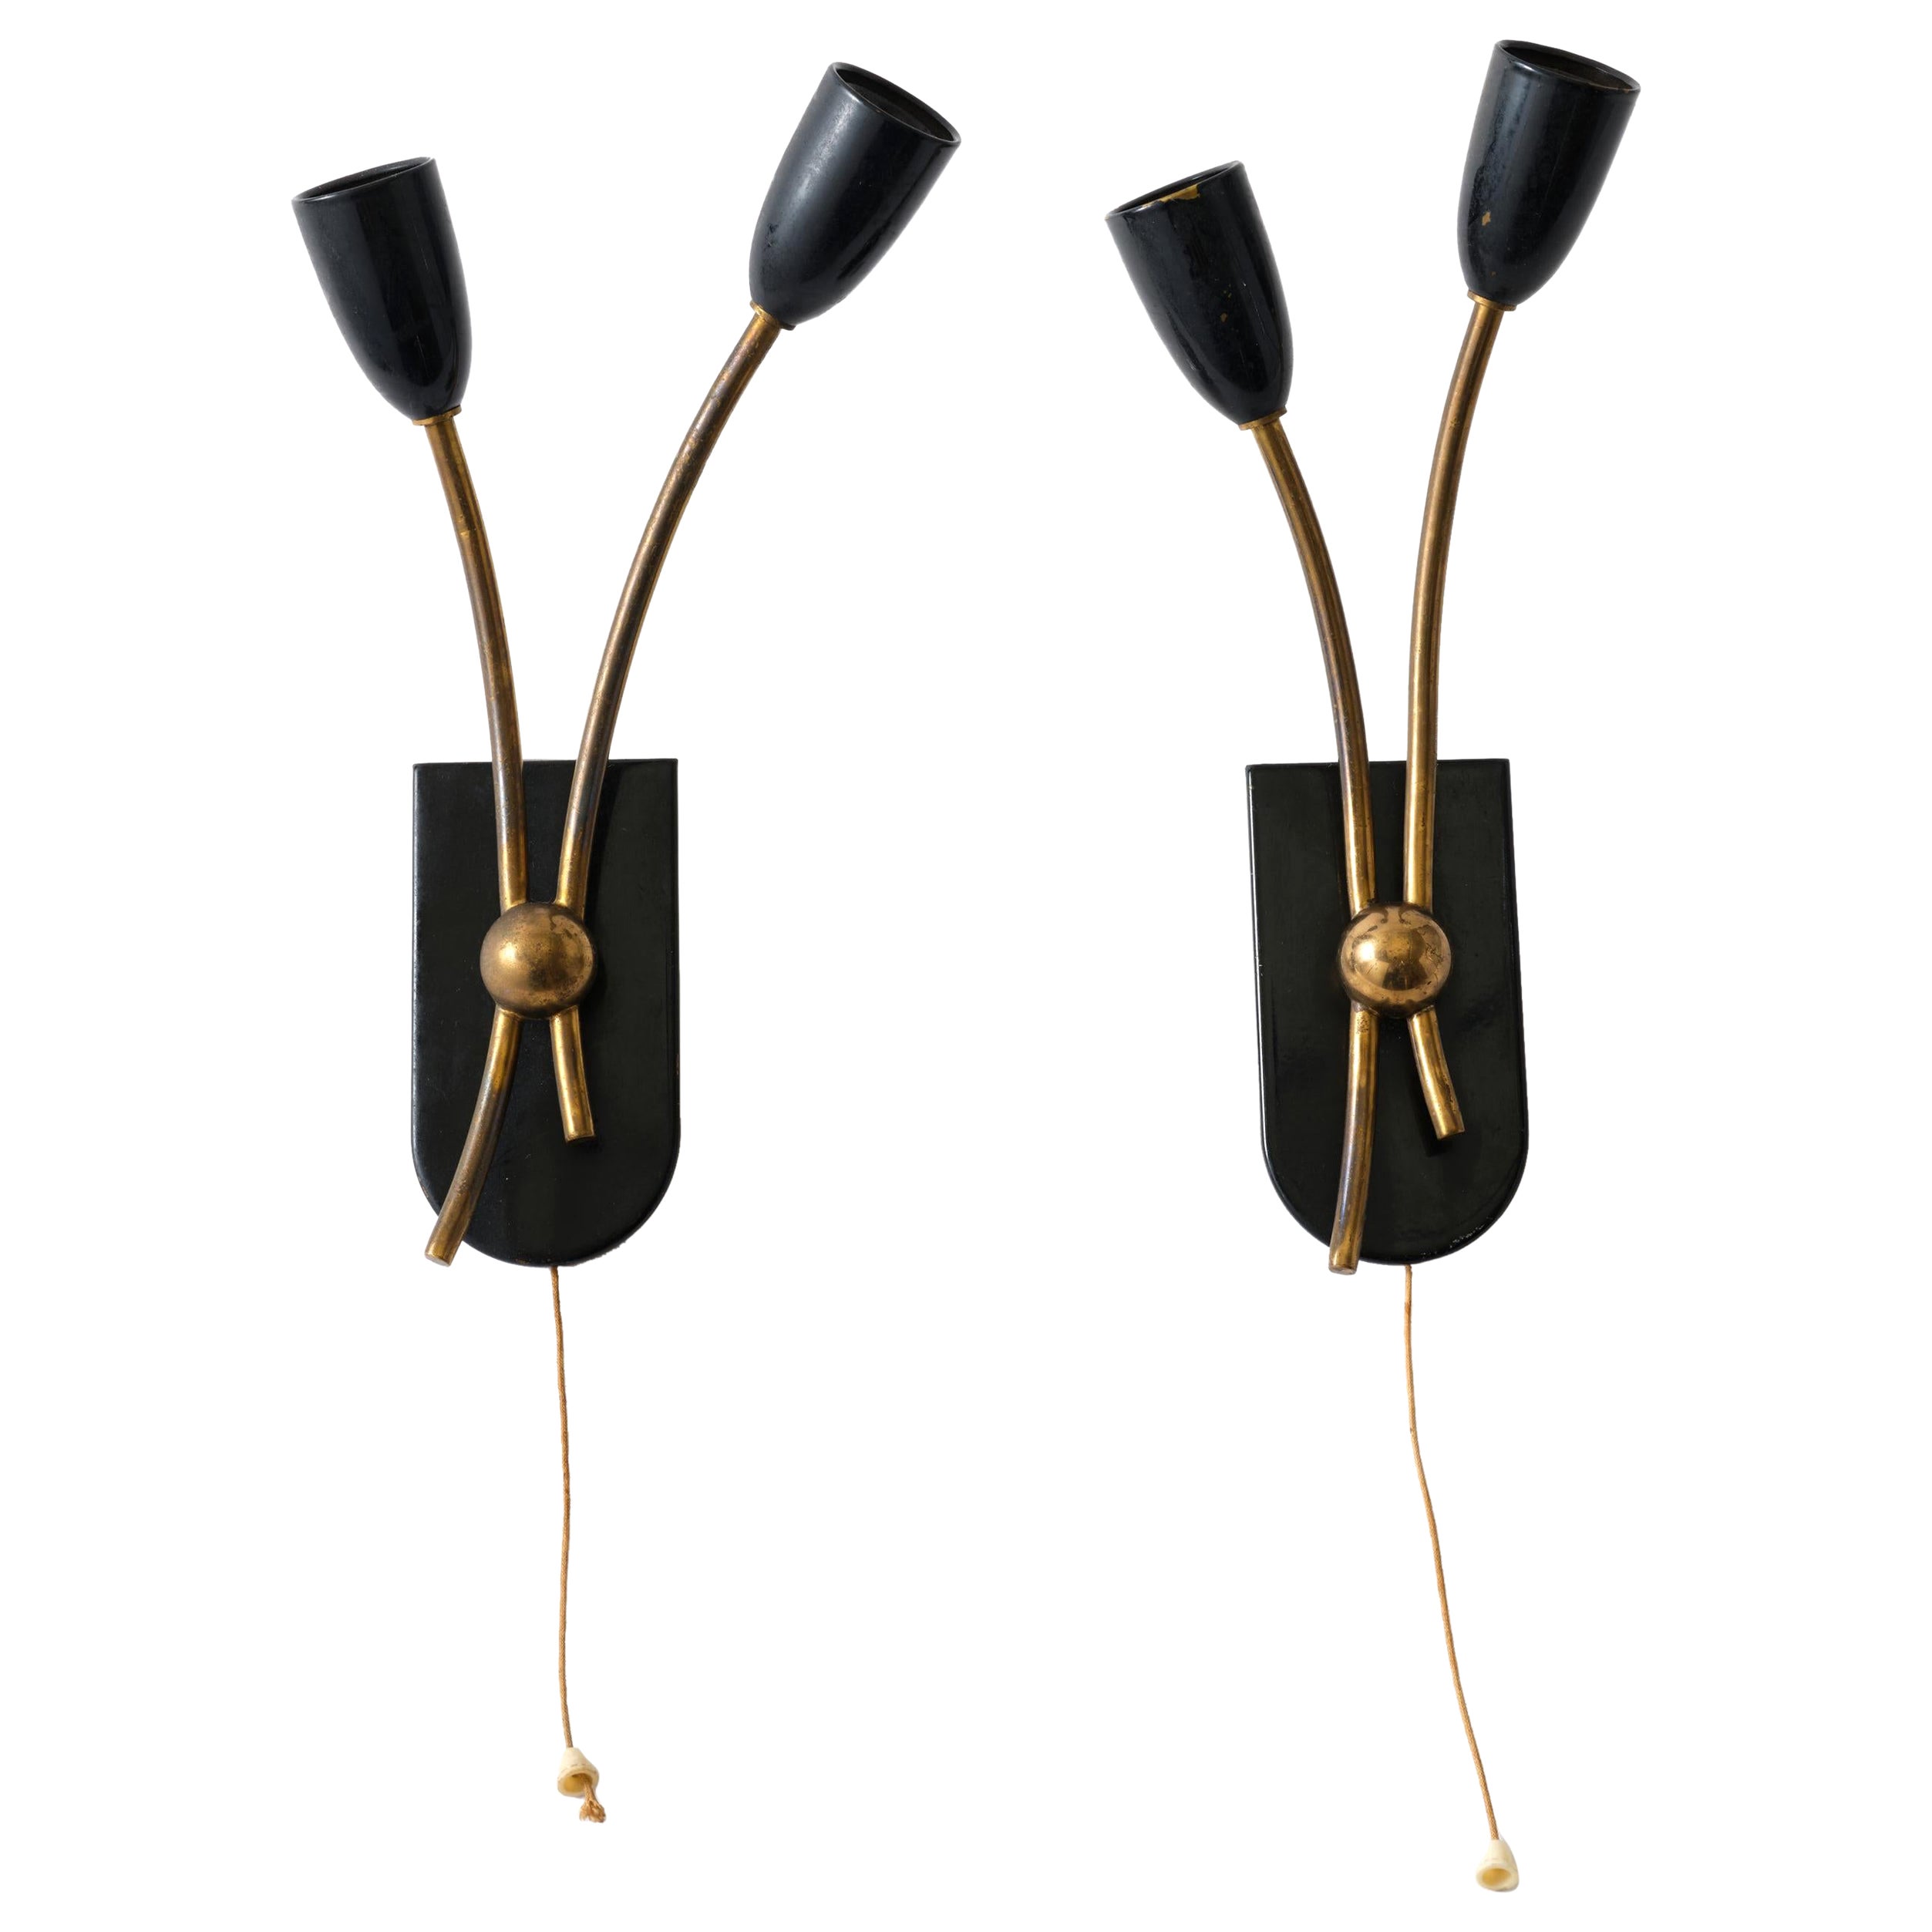 Pair of Sconces, Brass with Black Metal Details, Bed Side Lamps, Italy, C 1950